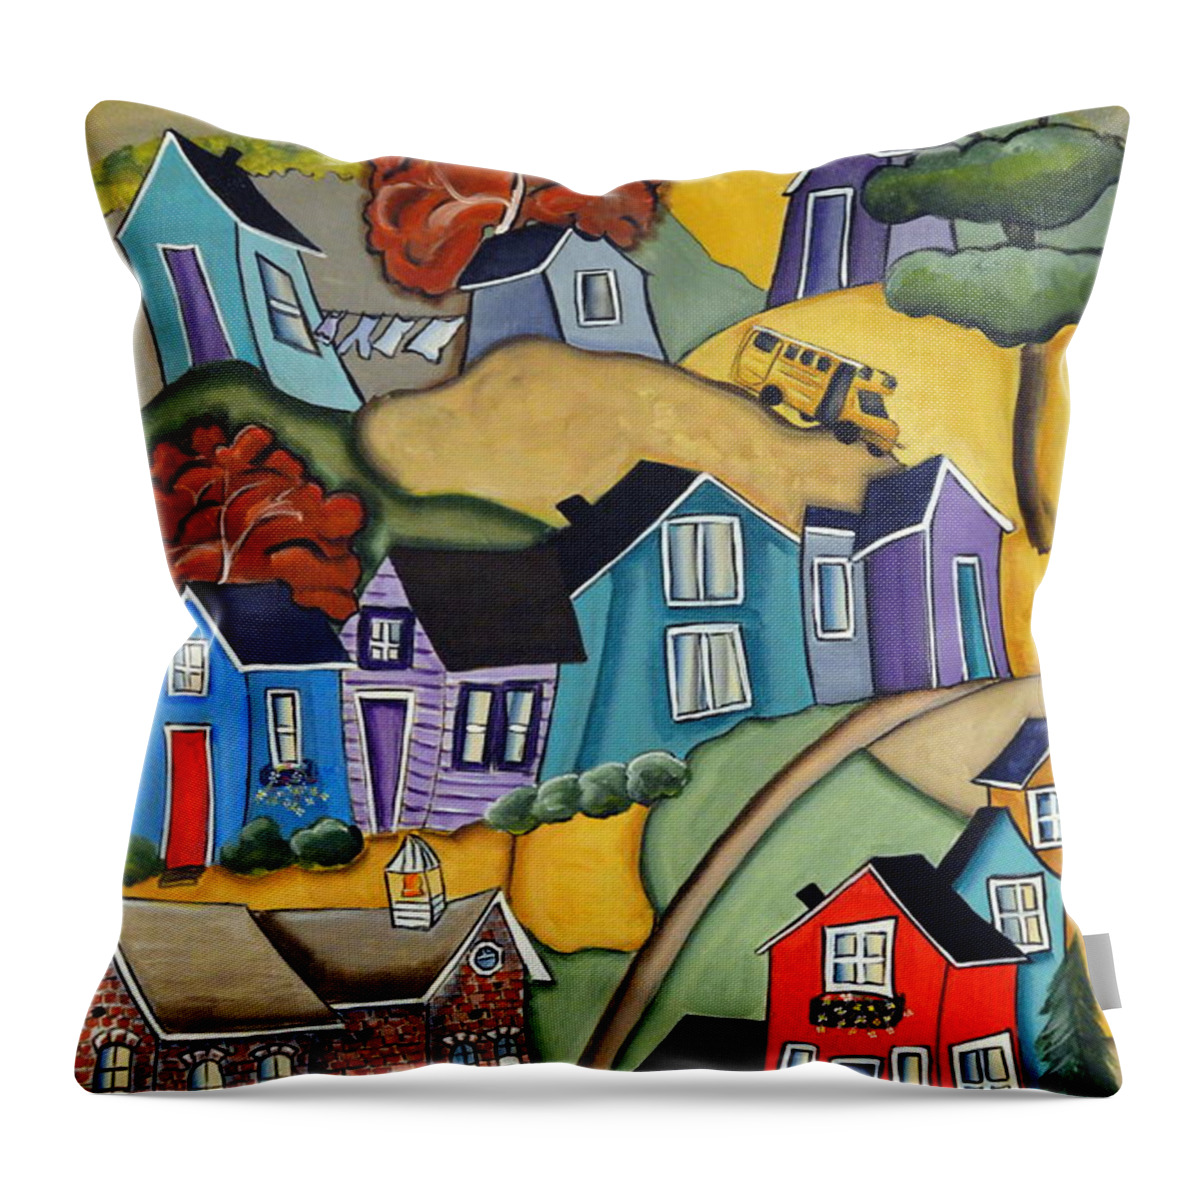 Abstract Throw Pillow featuring the painting School Days by Heather Lovat-Fraser